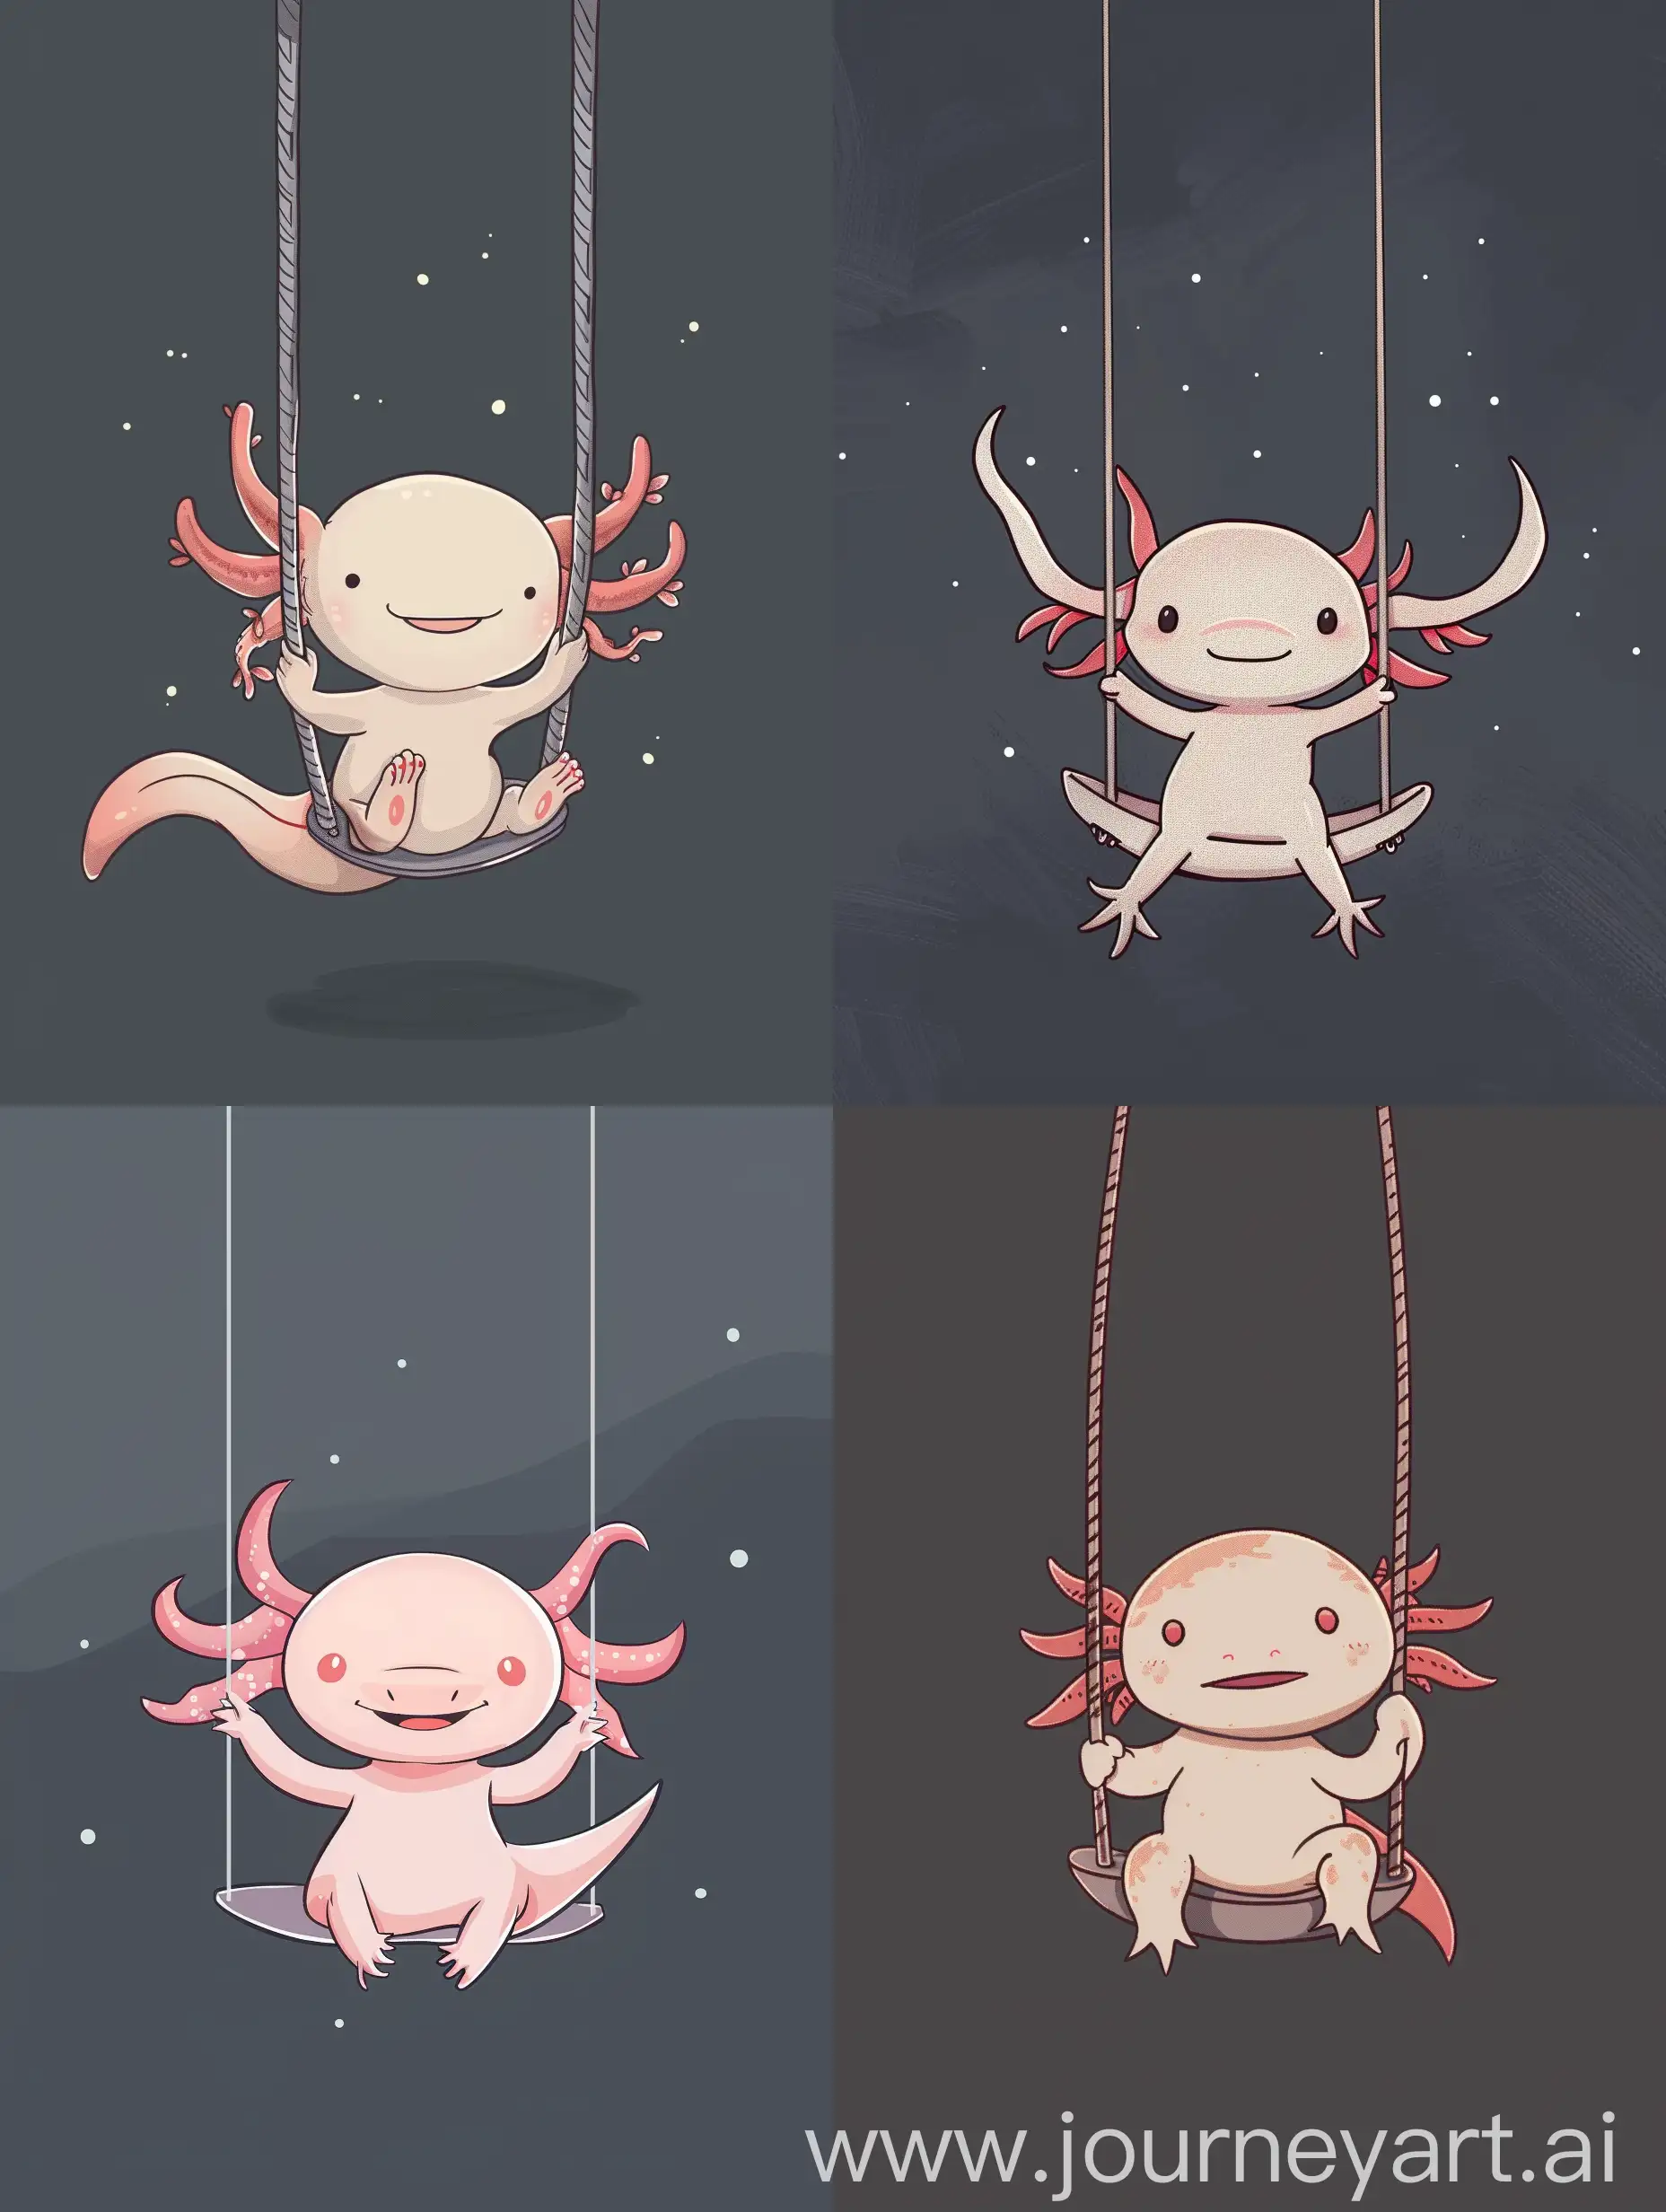 Chibi-Axolotl-Playing-Swing-Adorable-Thin-Line-Style-Illustration-on-Solid-Dark-Grey-Background